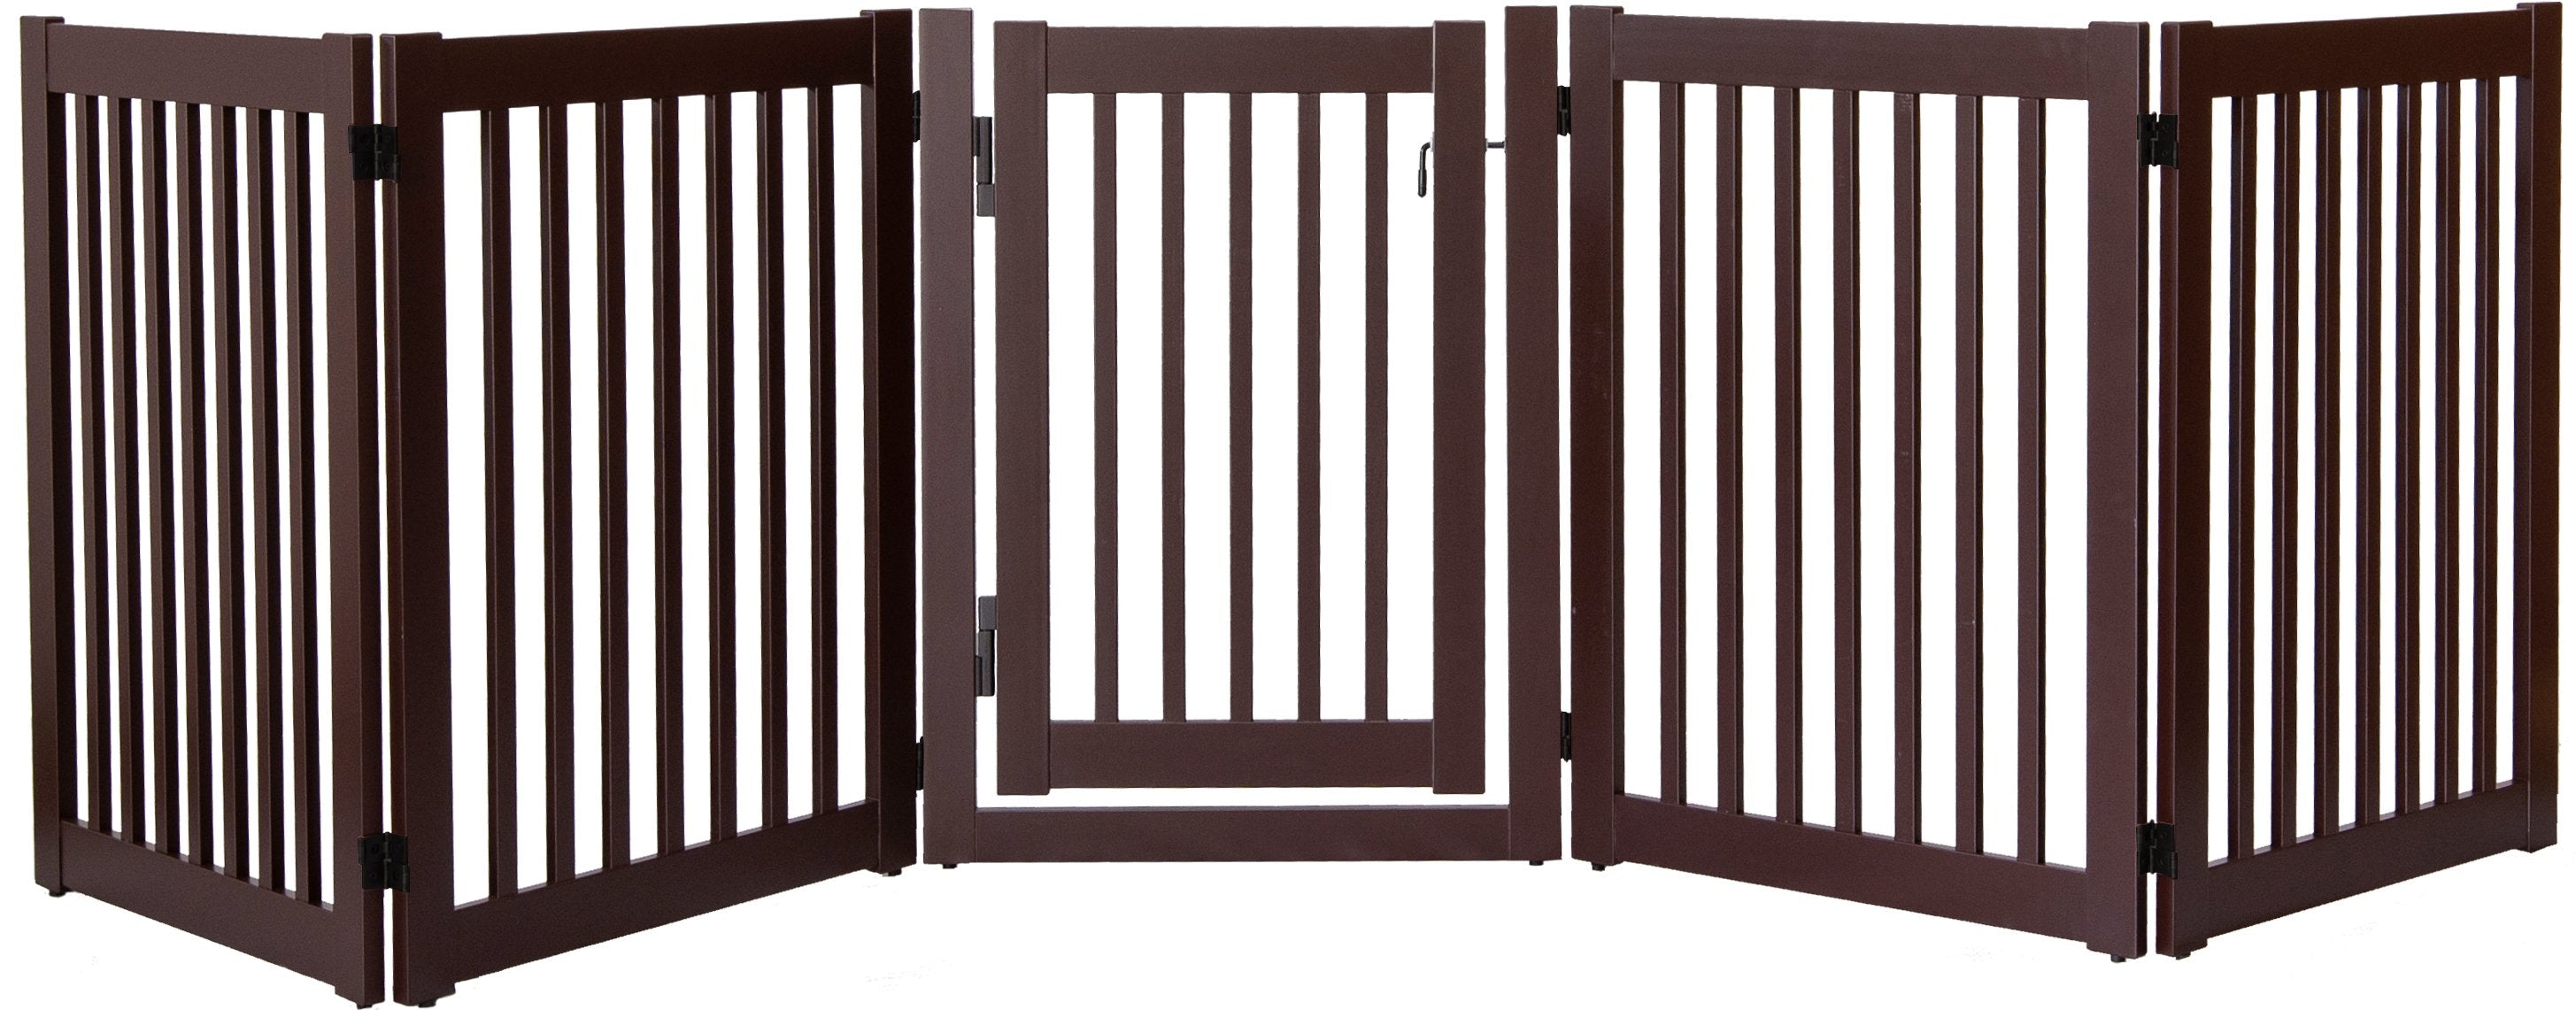 5 panel wide indoor pet barrier with swing gate - mahogany